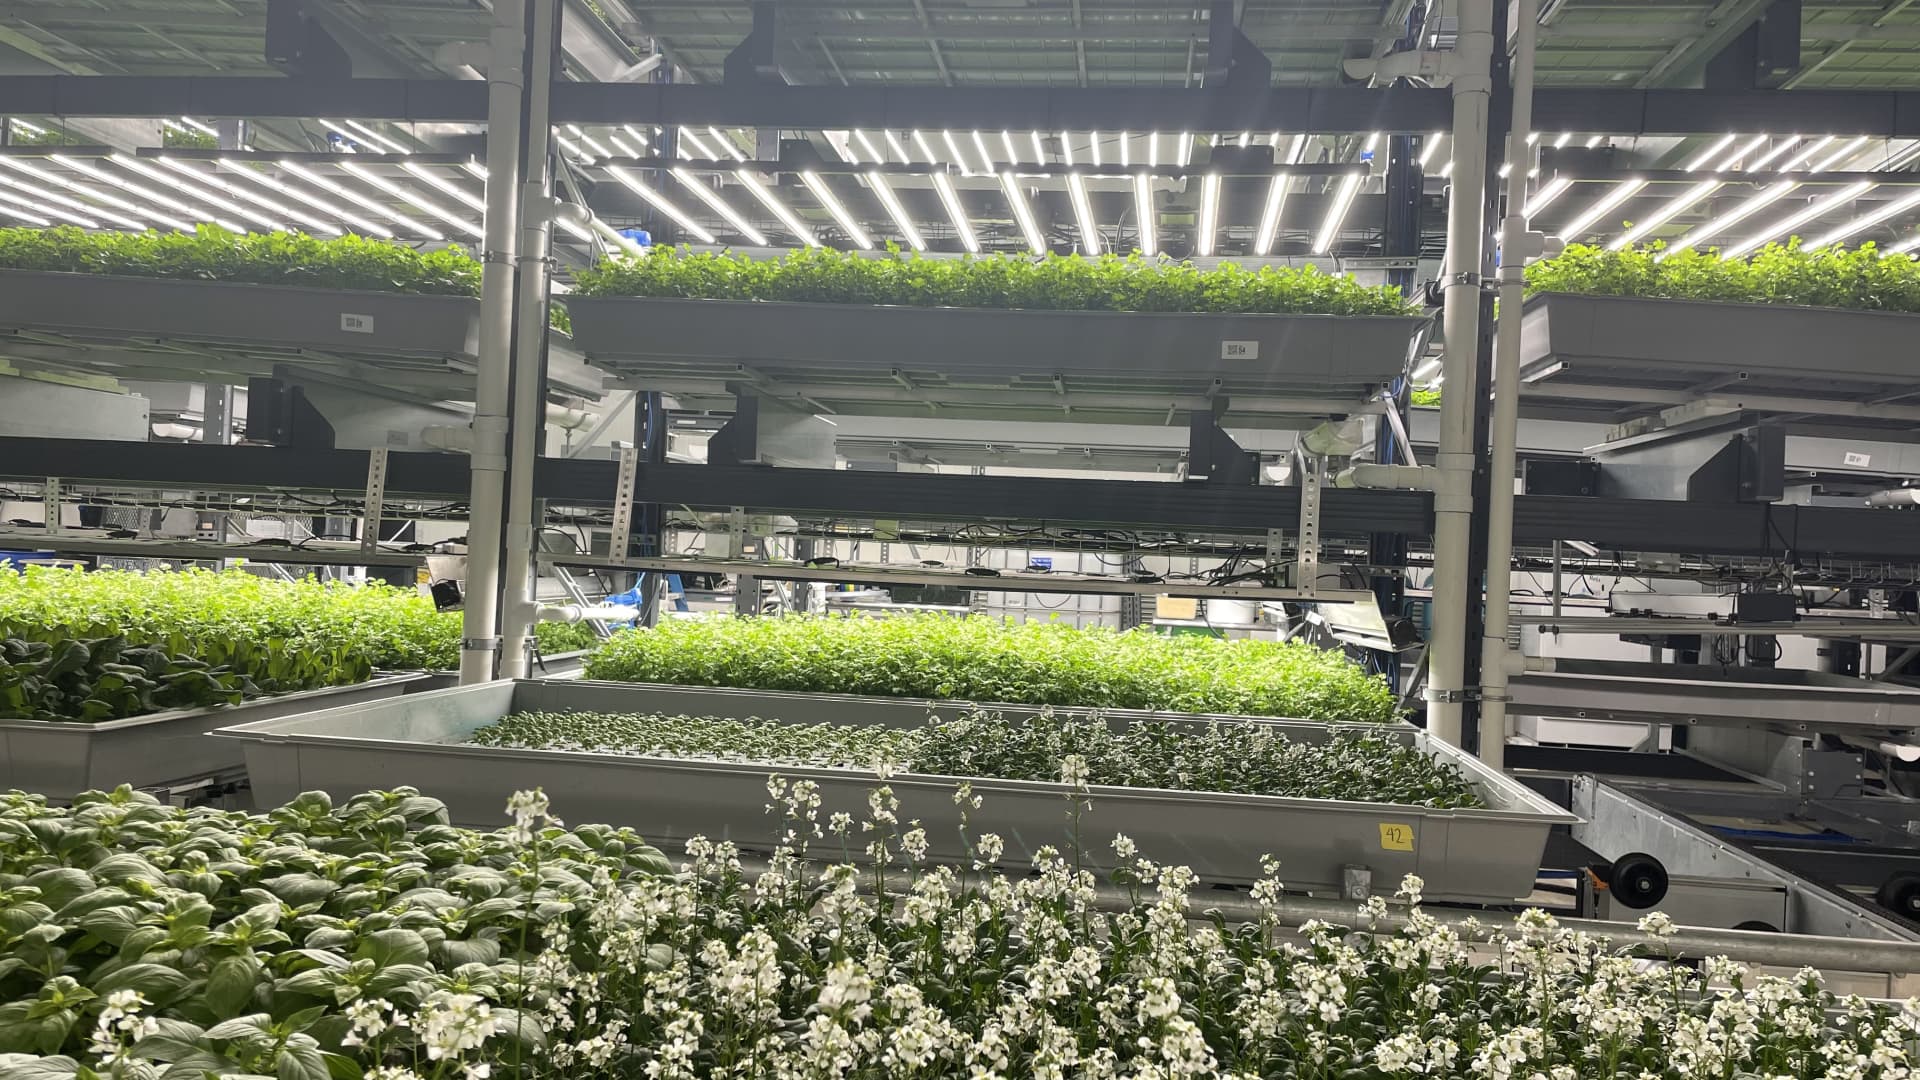 At Bowery's indoor farms, arugula, baby butter and other leafy green varieties grow in stacked rows from floor to ceiling. The company also sells rotating offerings, called Farmer's Selection, based on the season.